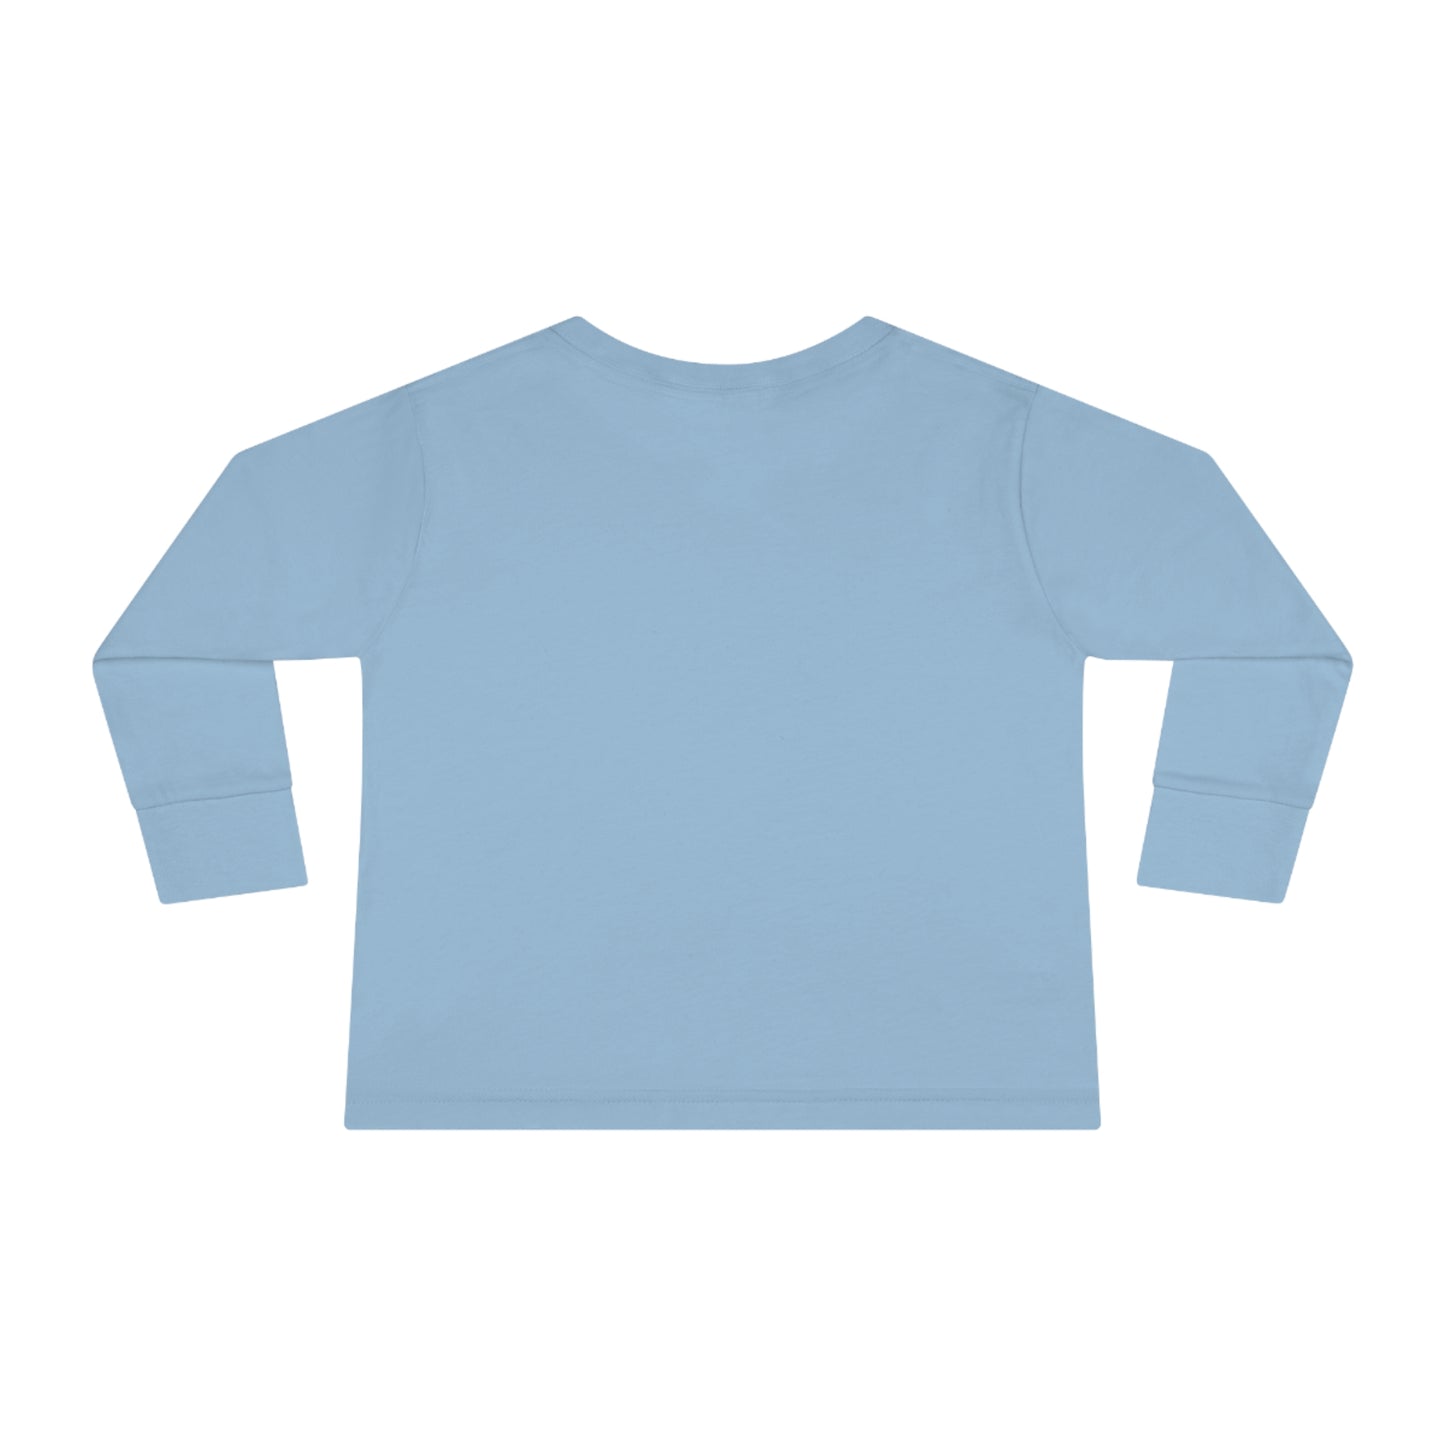 Toddler Long Sleeve Tee - Keep Calm and Shell On